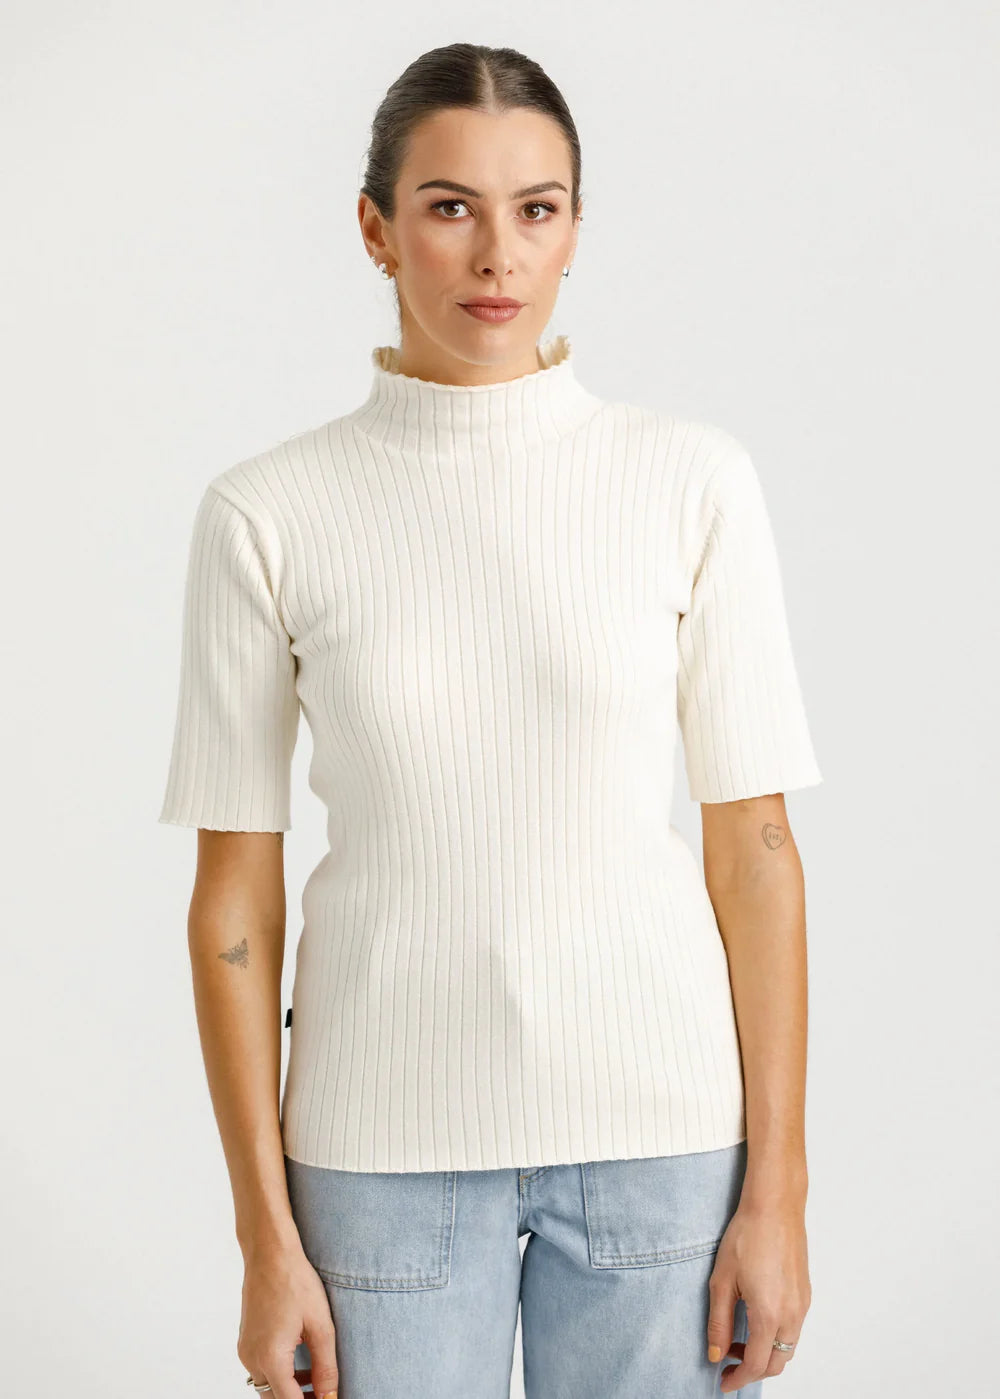 THING THING // Short Sleeve Turtle Neck UNBLEACHED